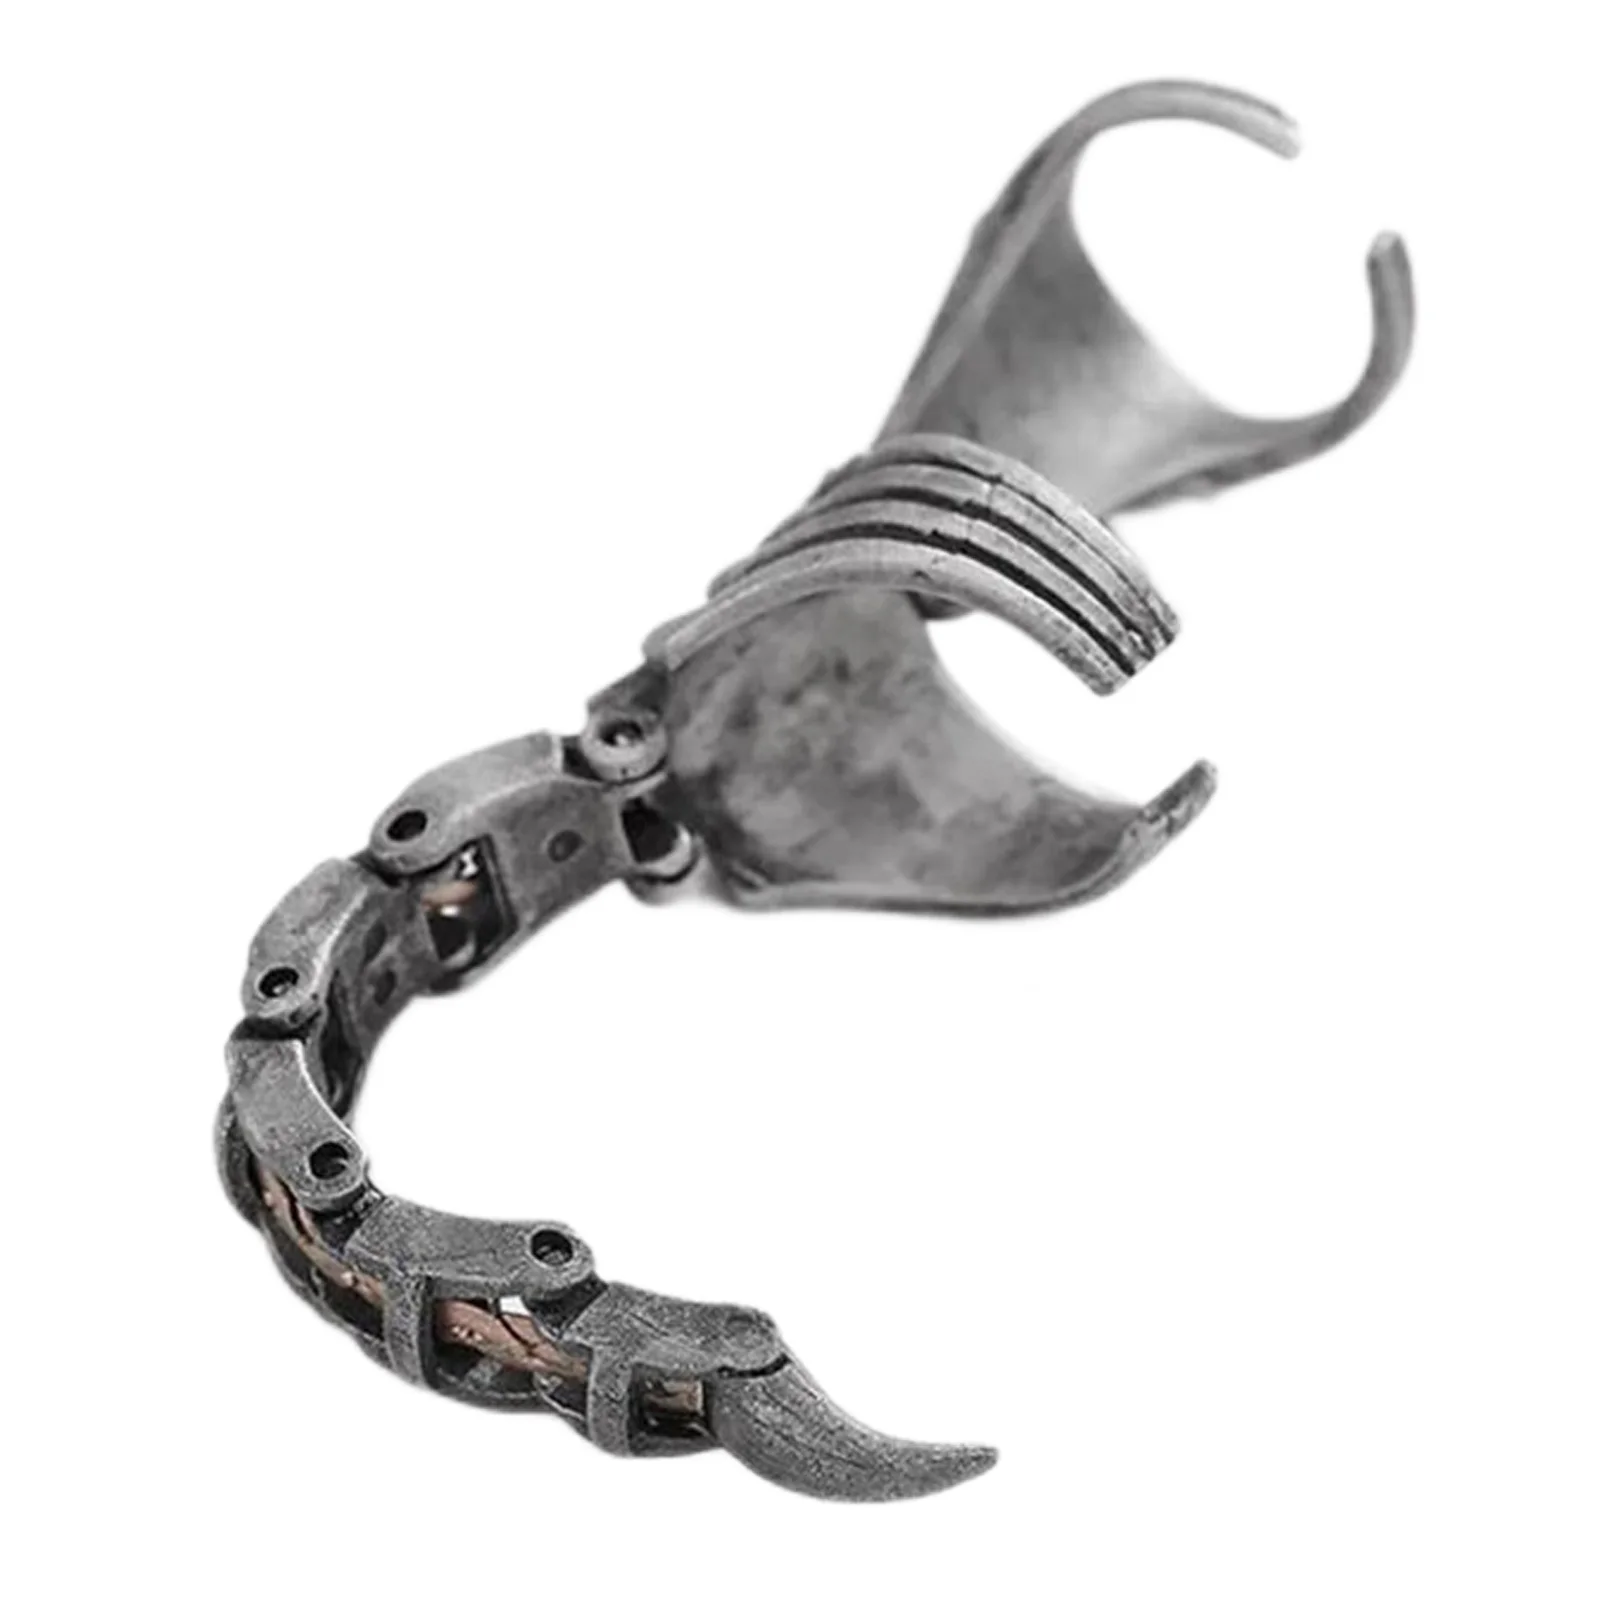 

Scorpion Ring Heavy Rock Punk Joint Rings Adjustable Vintage Cool Gothic Scroll Armor Knuckle Metal Full Finger Rings For Men